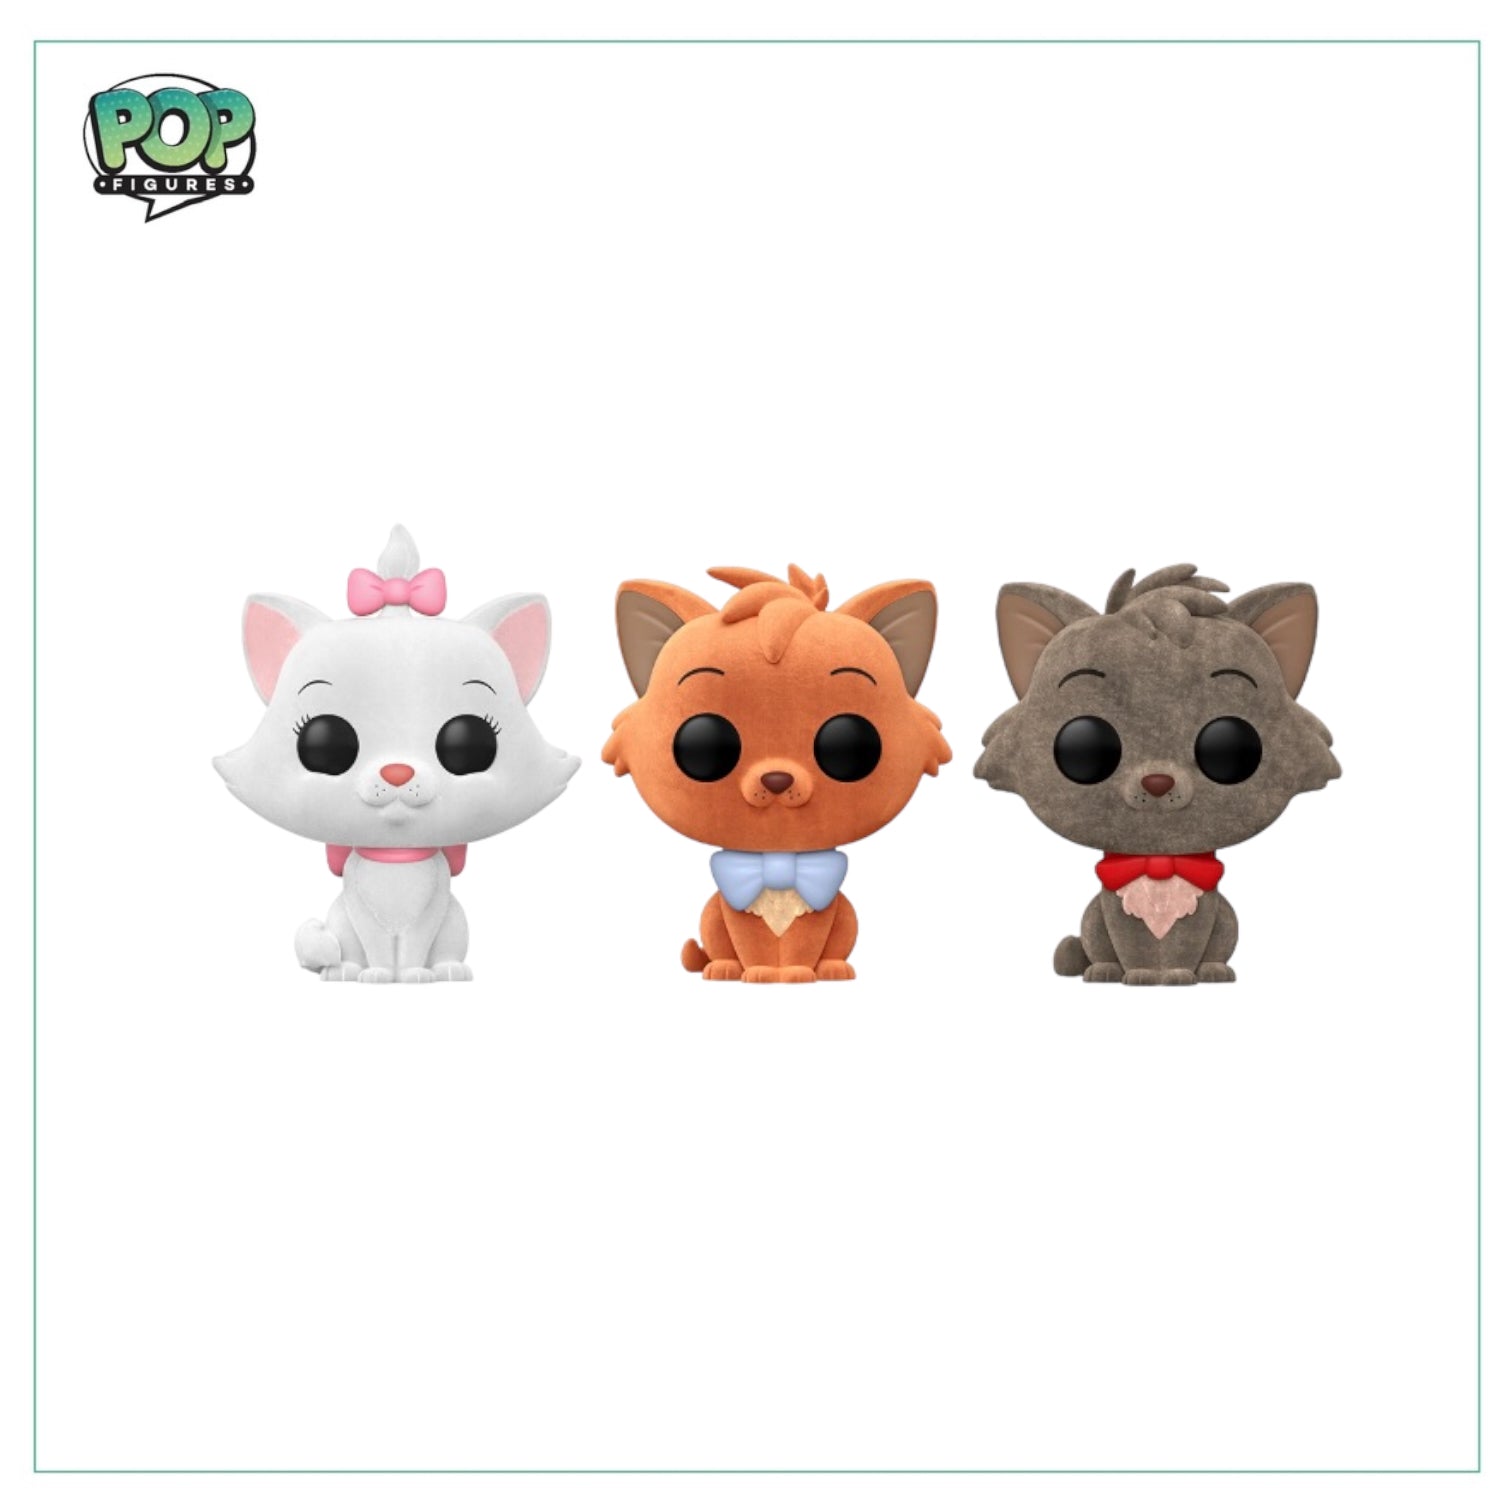 Marie / Toulouse / Berlioz (Flocked) 3 Pack Funko Pop! - Disney 100 - Walmart Exclusive - Condition 7/10